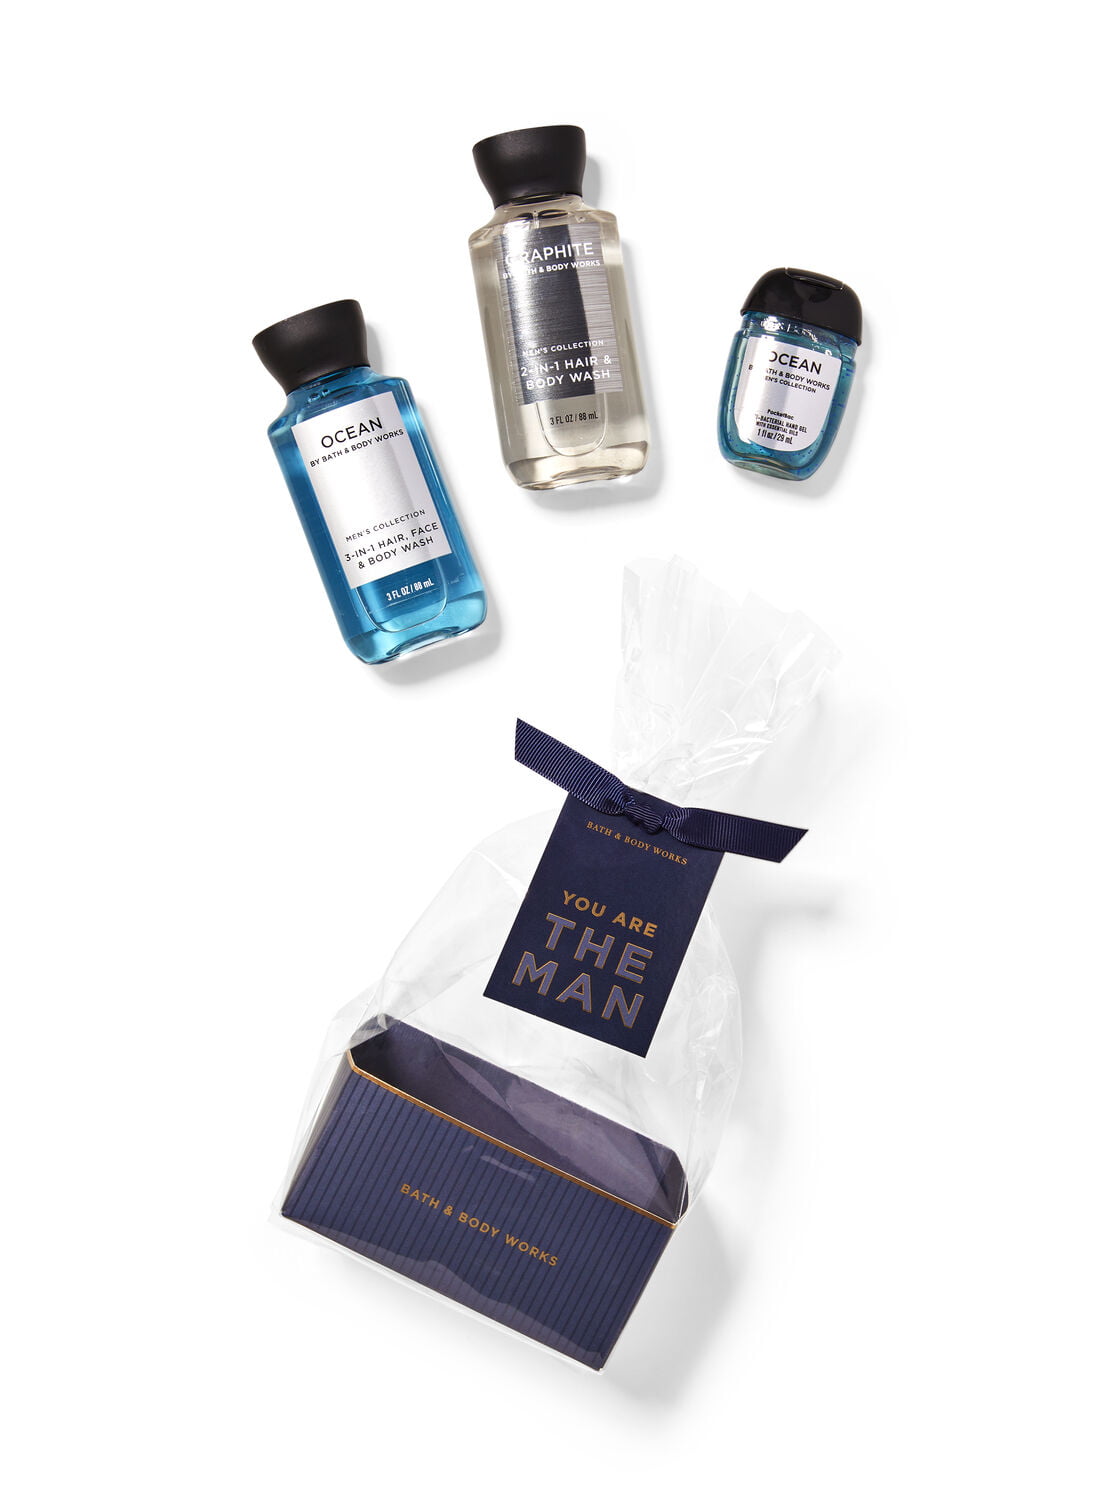 Bath and Body Works Ocean and Graphite Mini Gift Set You Are The Man -  Walmart.com